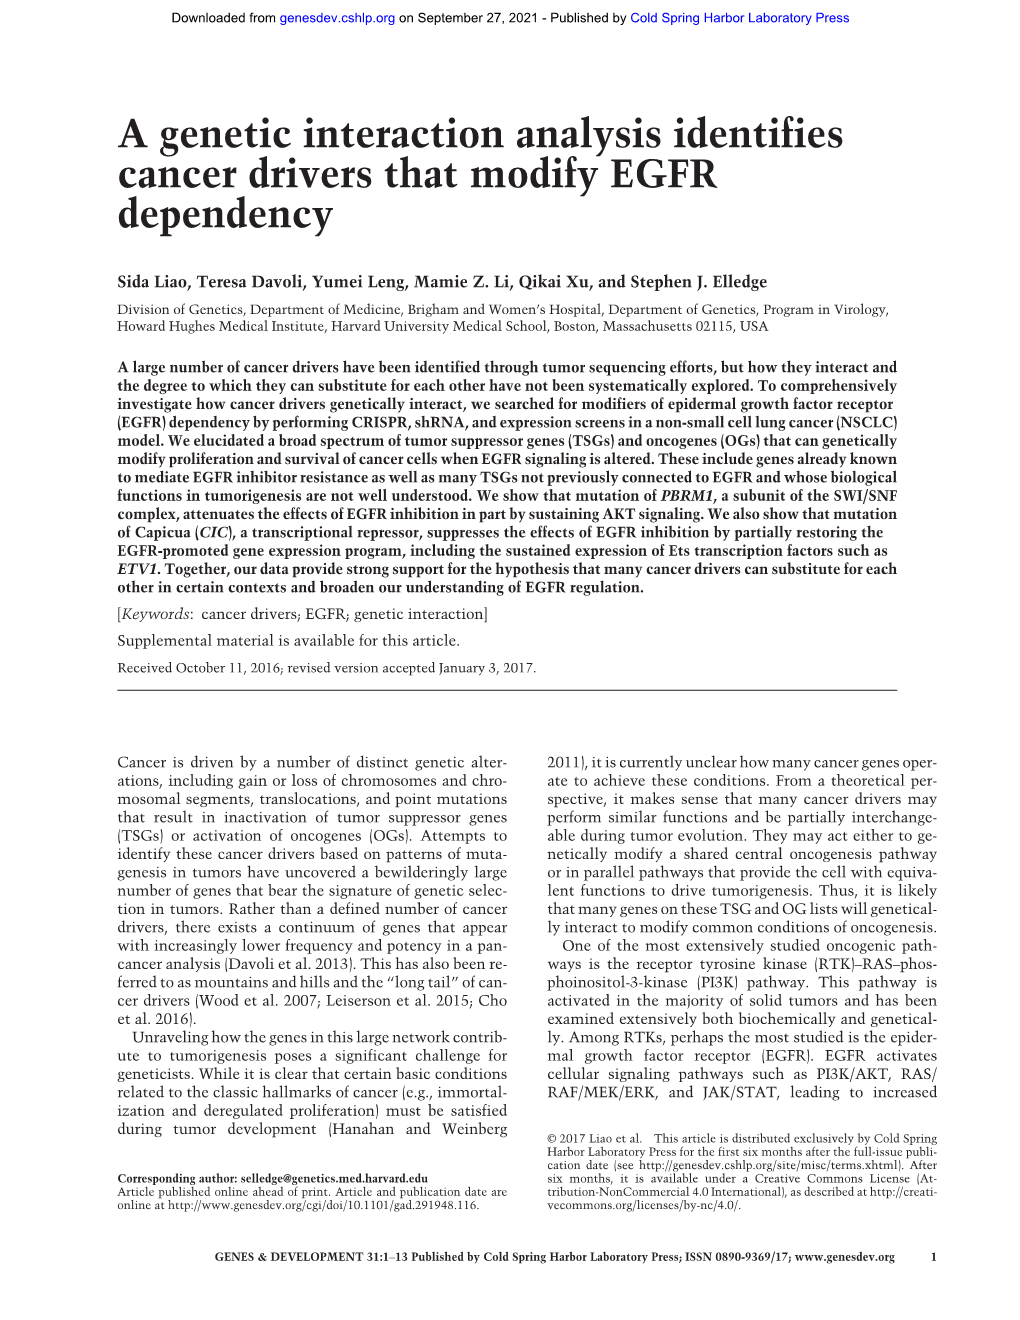 A Genetic Interaction Analysis Identifies Cancer Drivers That Modify EGFR Dependency